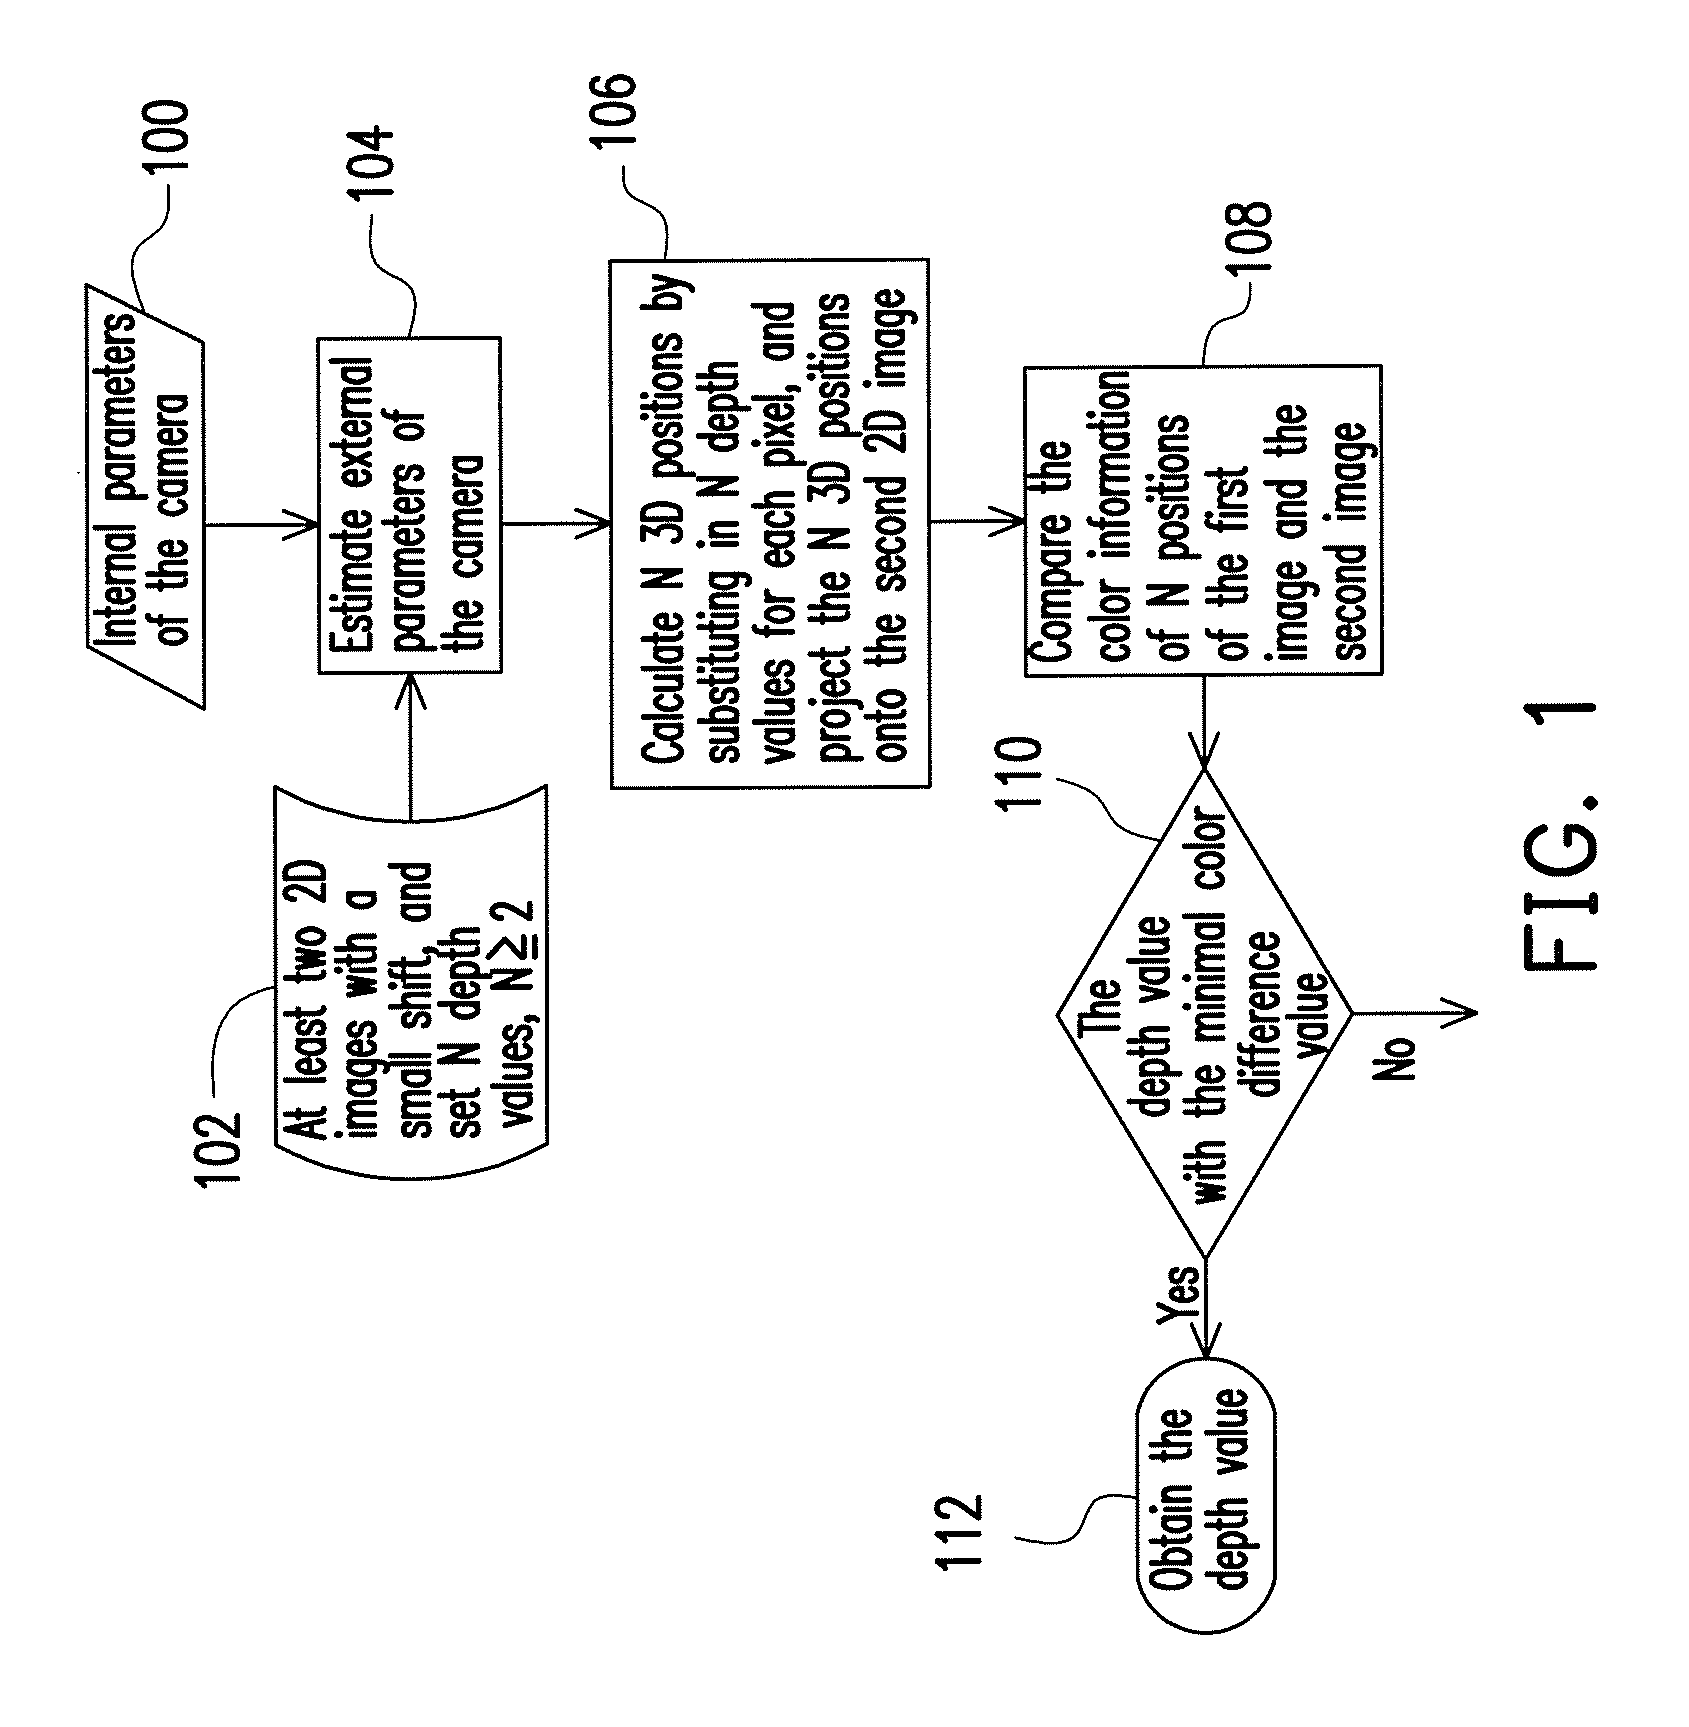 Method for producing image with depth by using 2D images